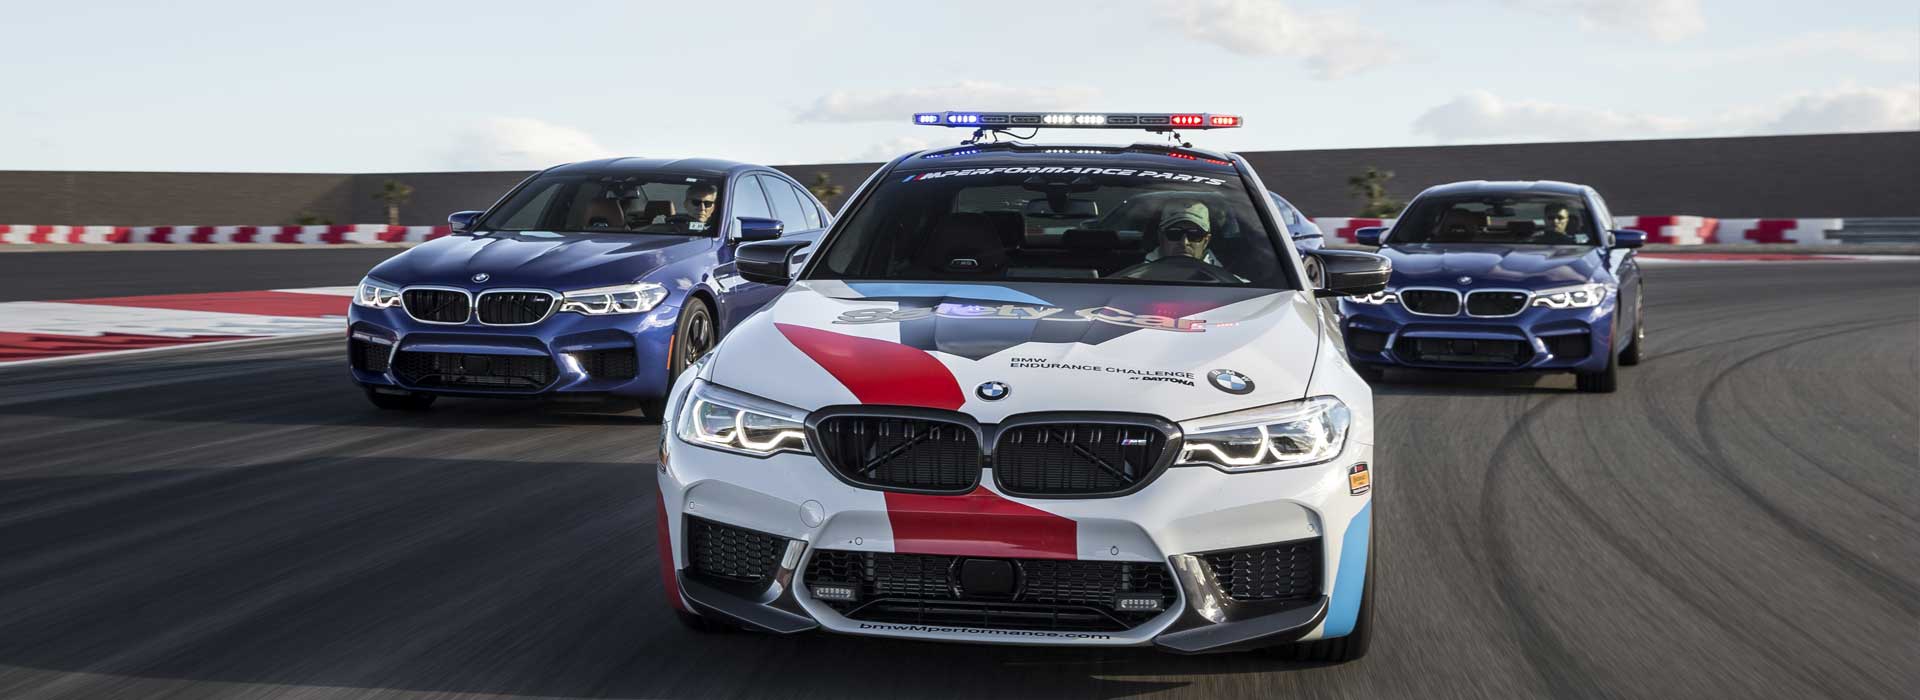 BMW To Serve As Official Pace Car and Safety Car at 22nd Annual Motul Petit Le Mans